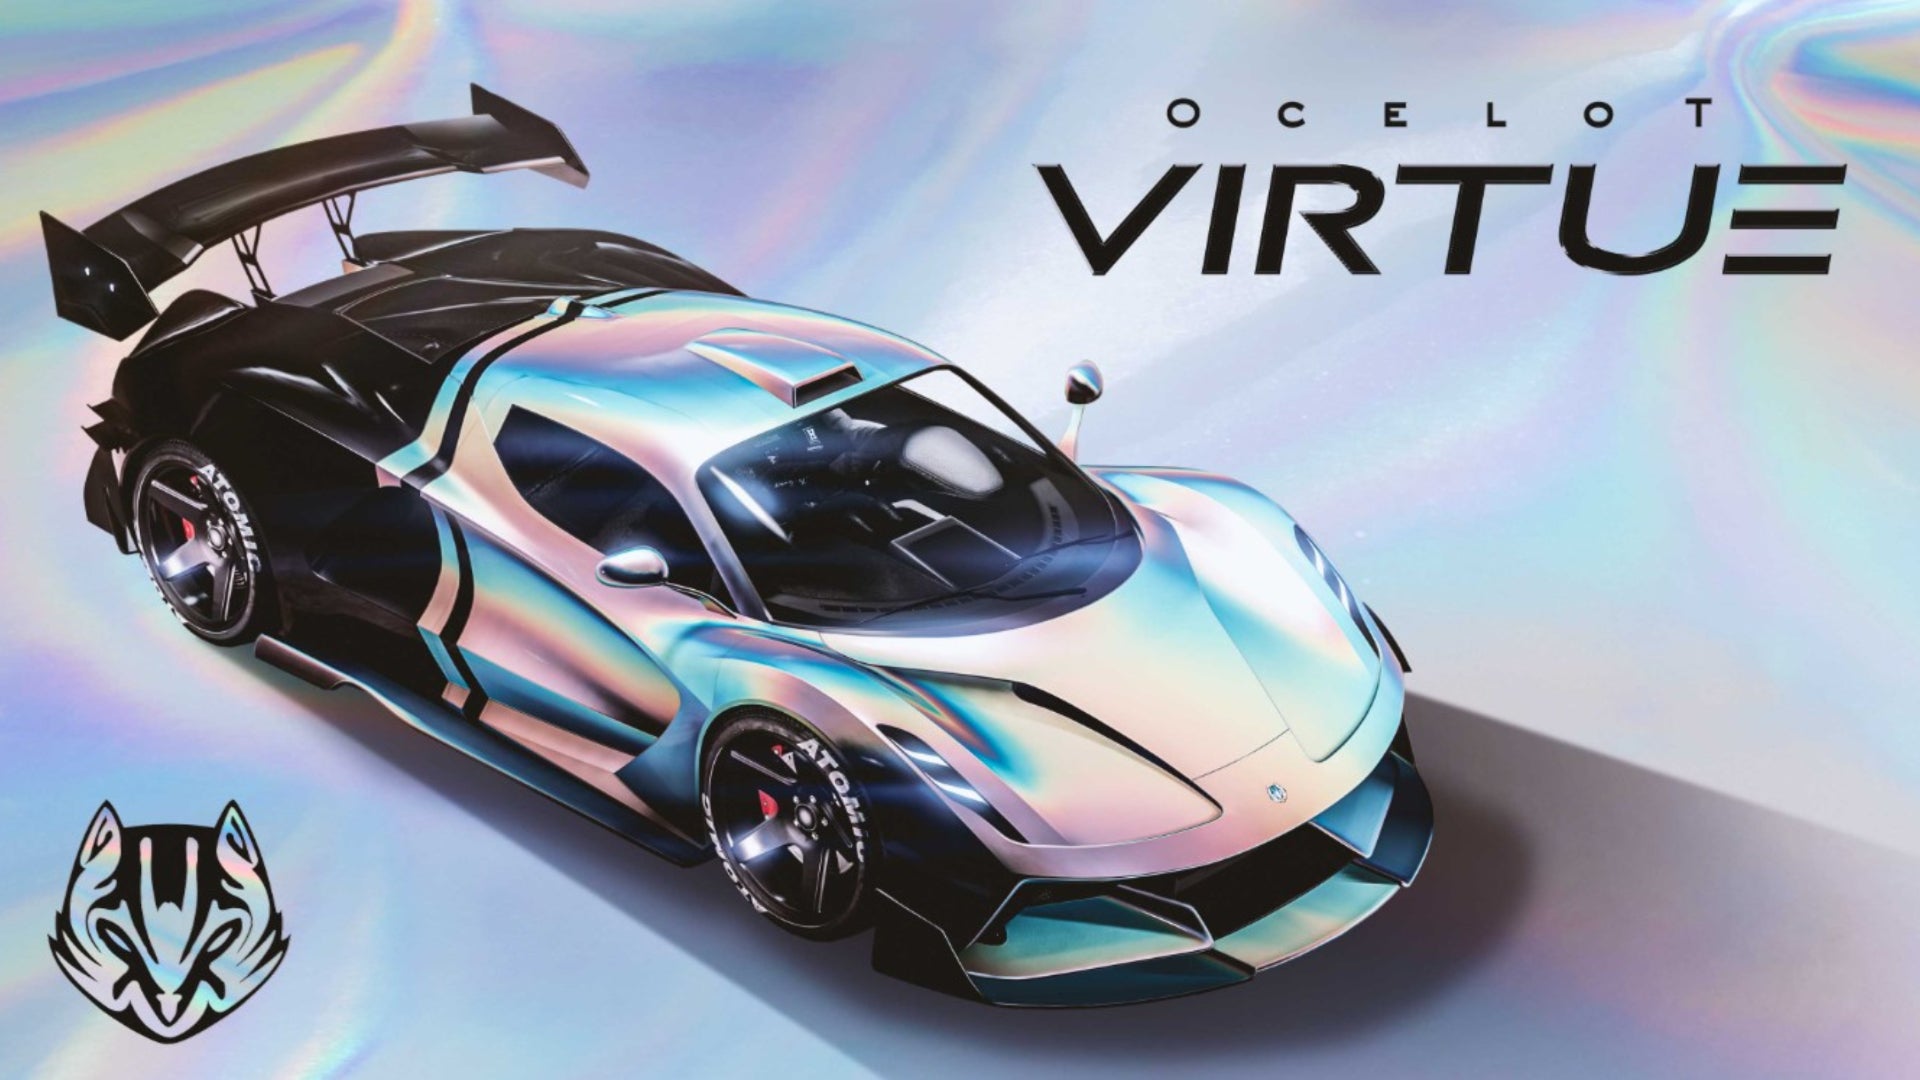 GTA Online Official Newswire Image of the Ocelot Virtue